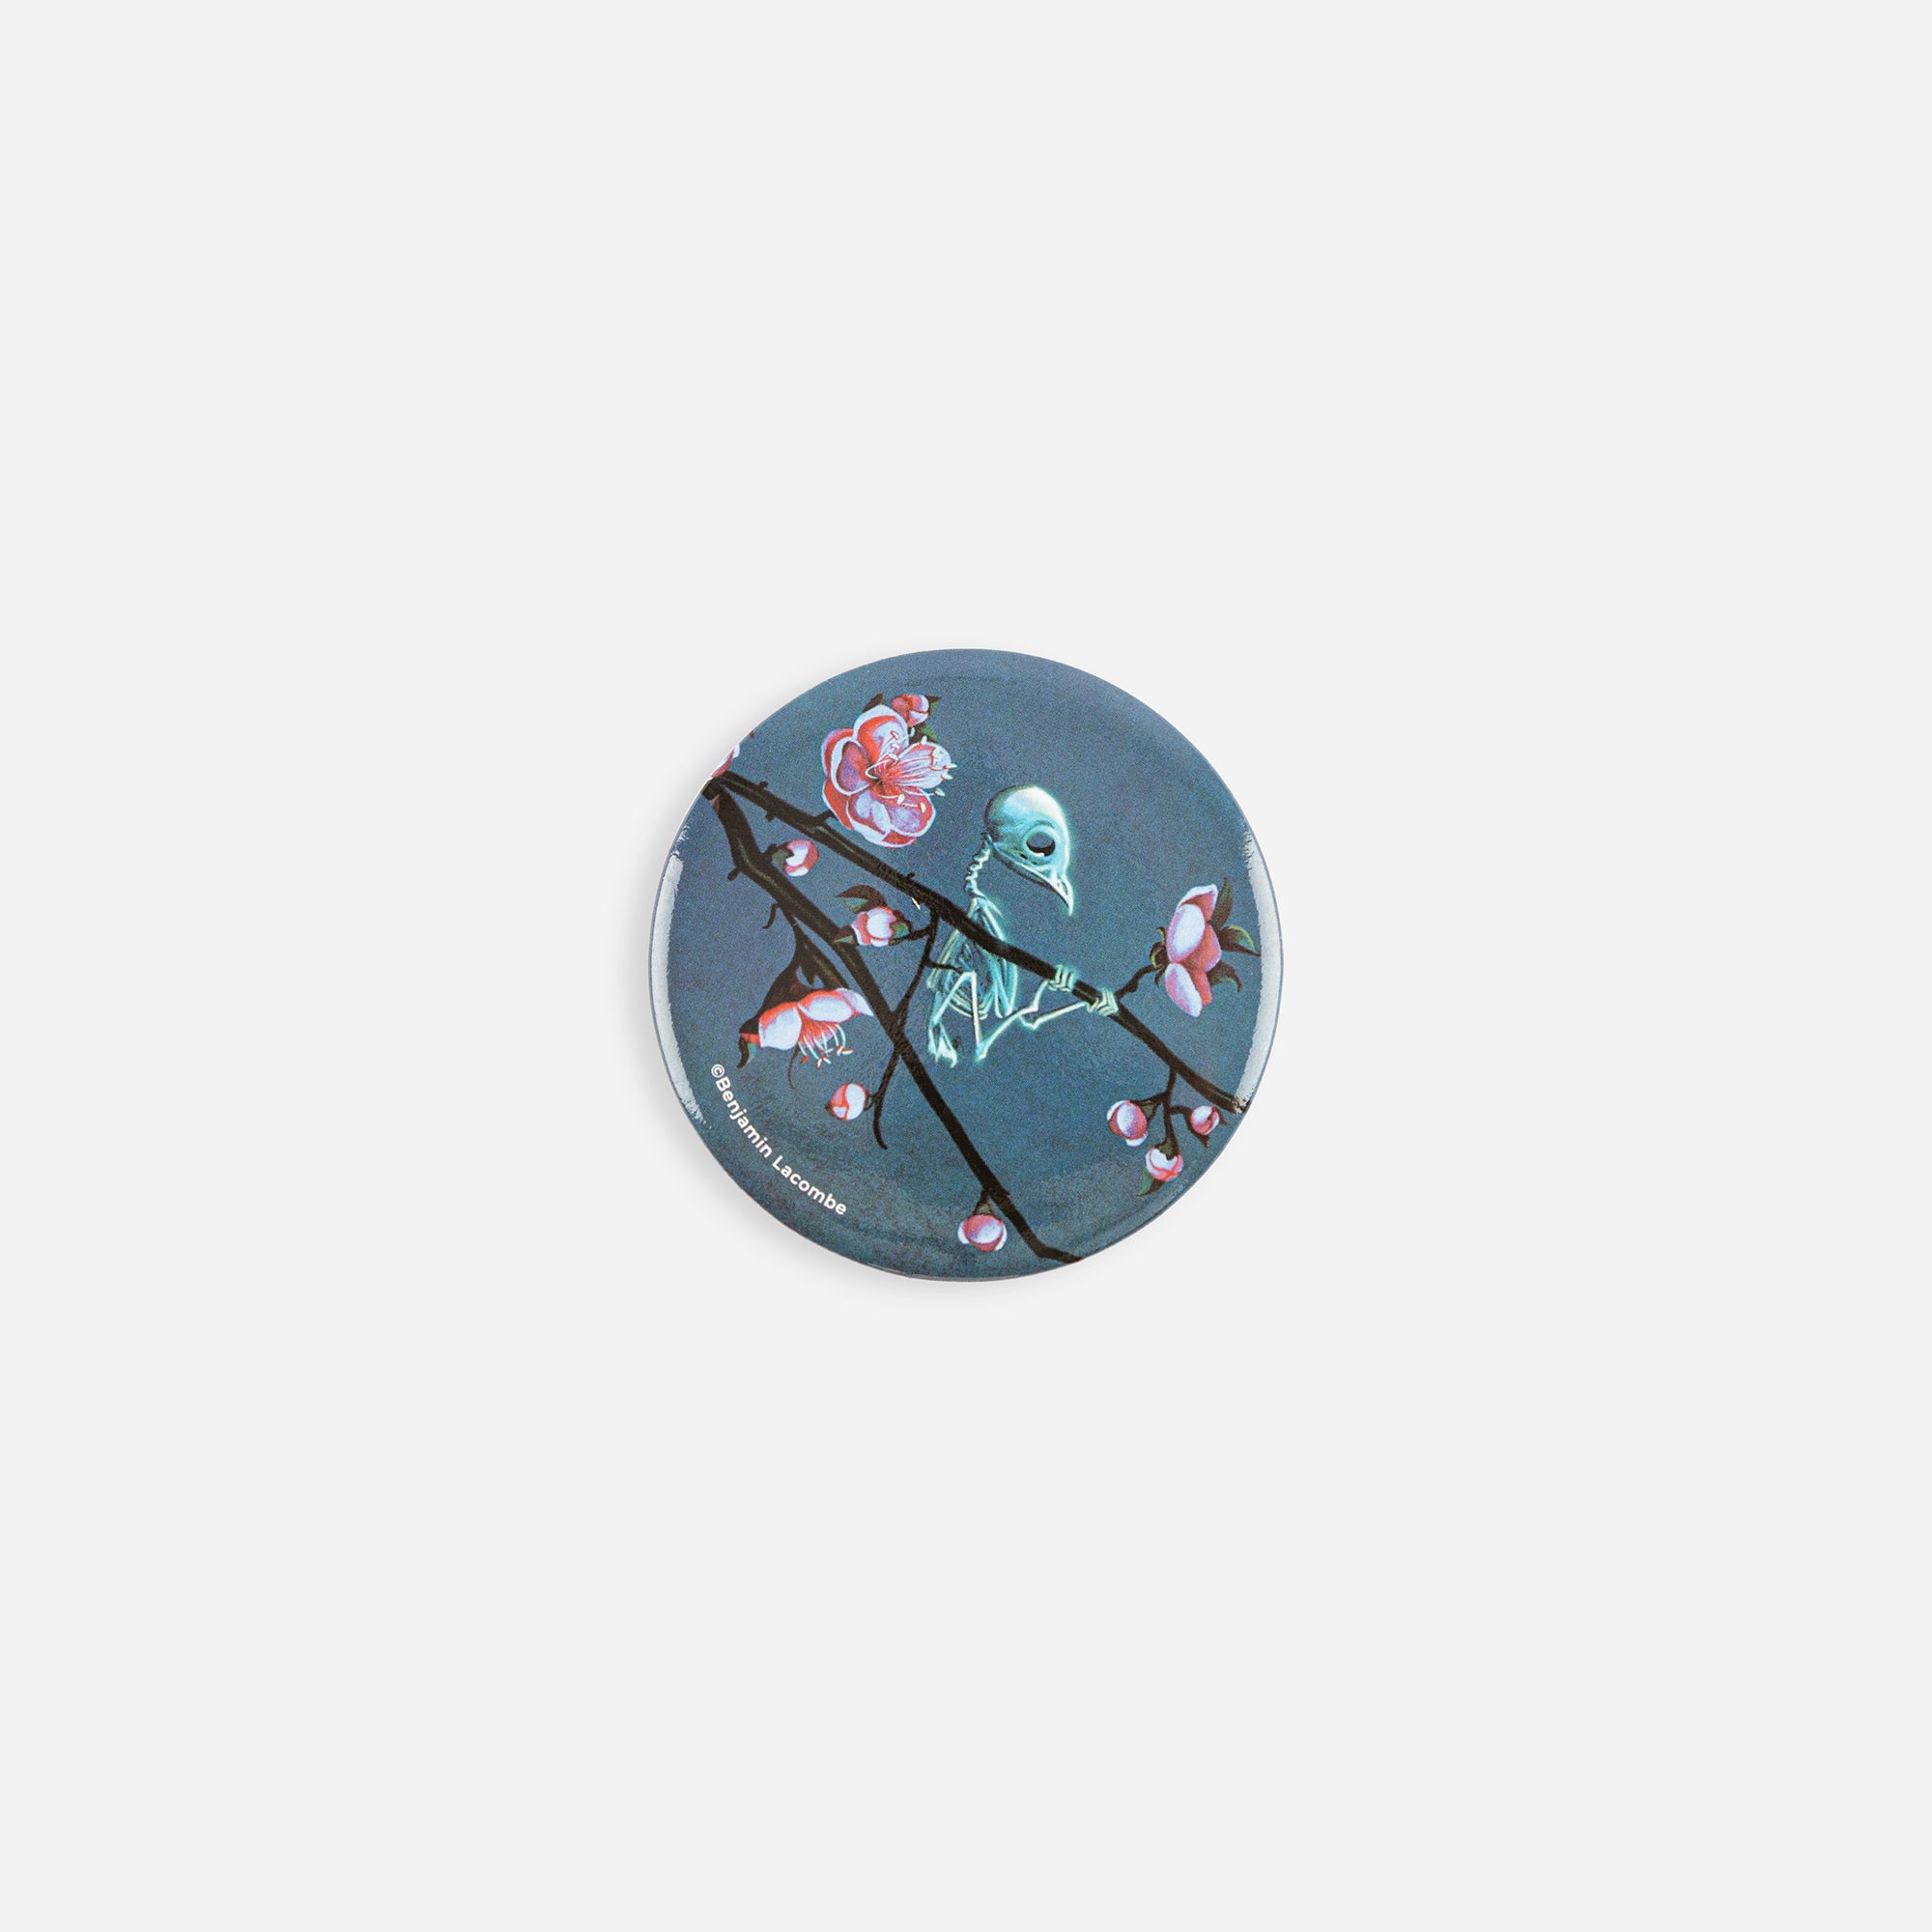 44mm Brooches - Ghosts &amp; Spirits of Japan